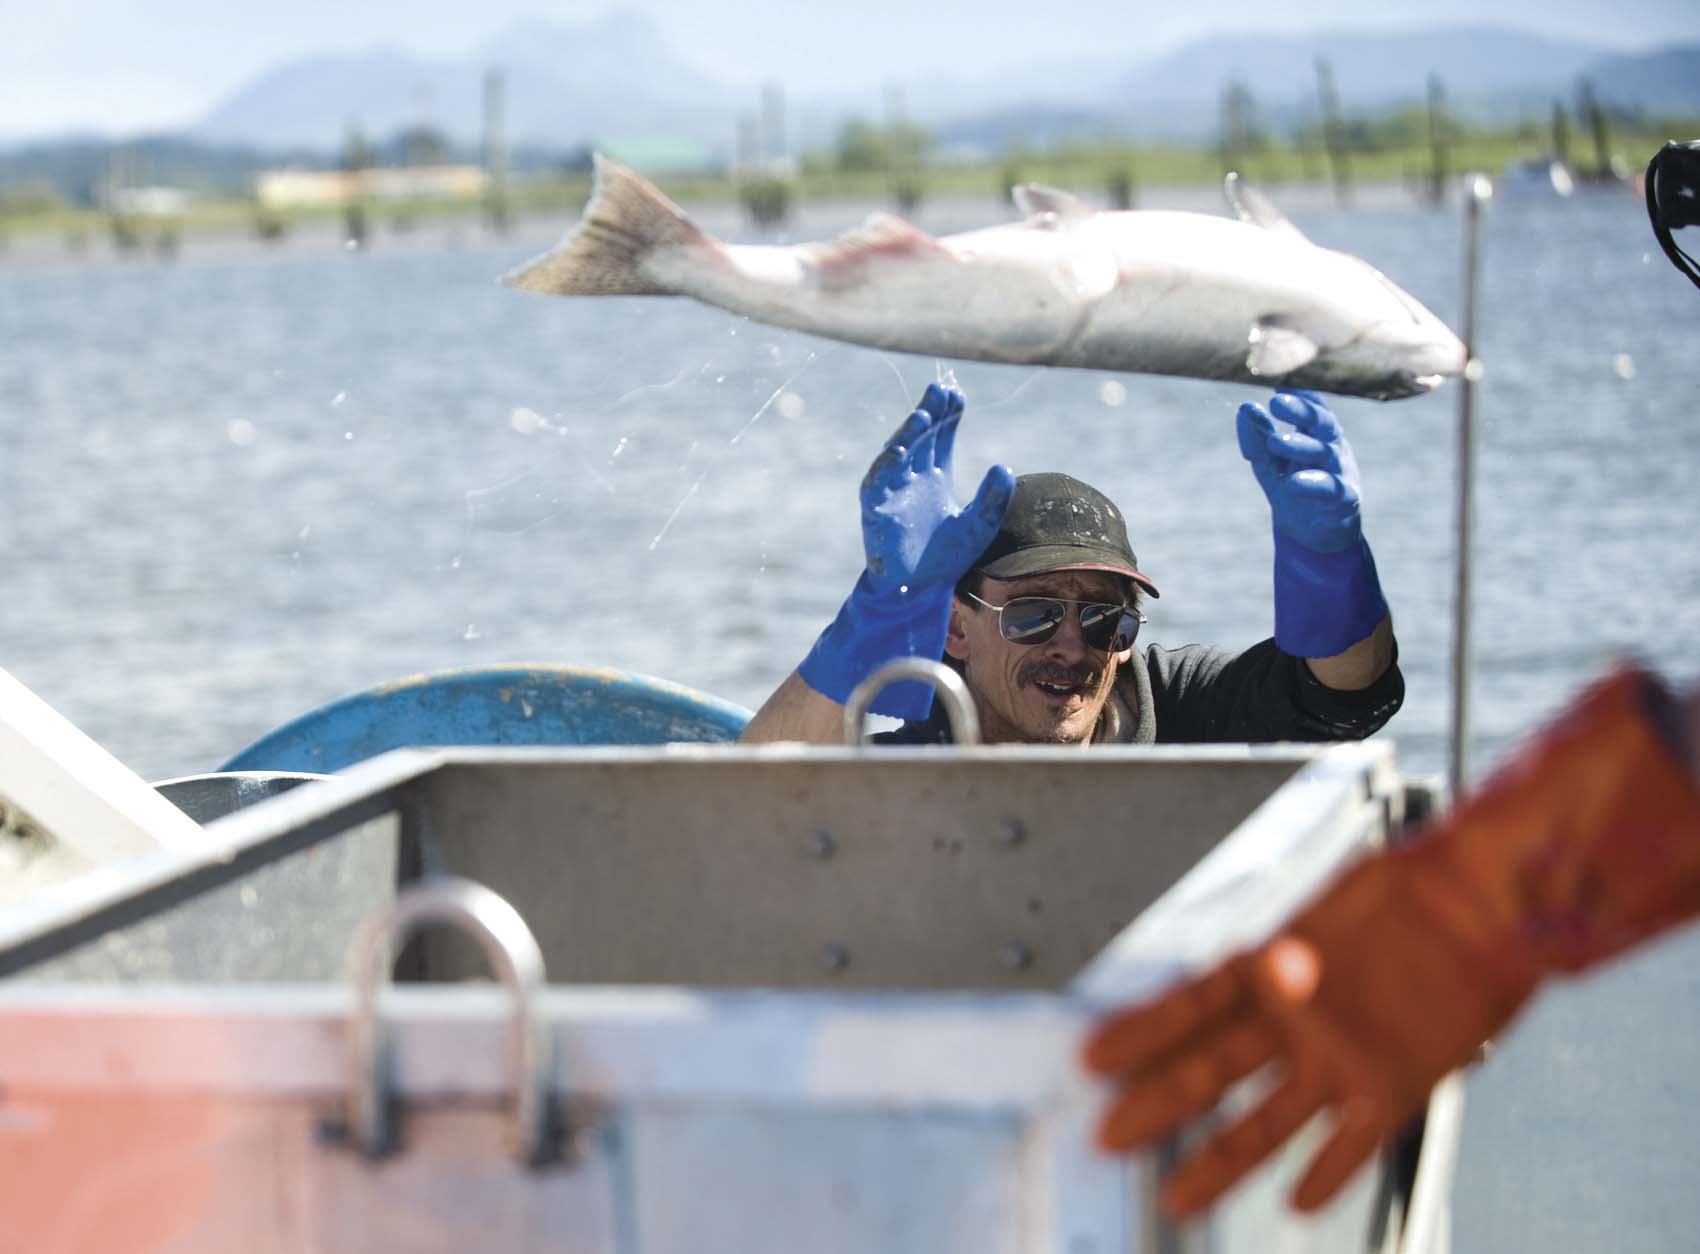 Gillnetters in the lower Columbia River say their fisheries fill niches in the market when high-quality salmon are not available from other waters.